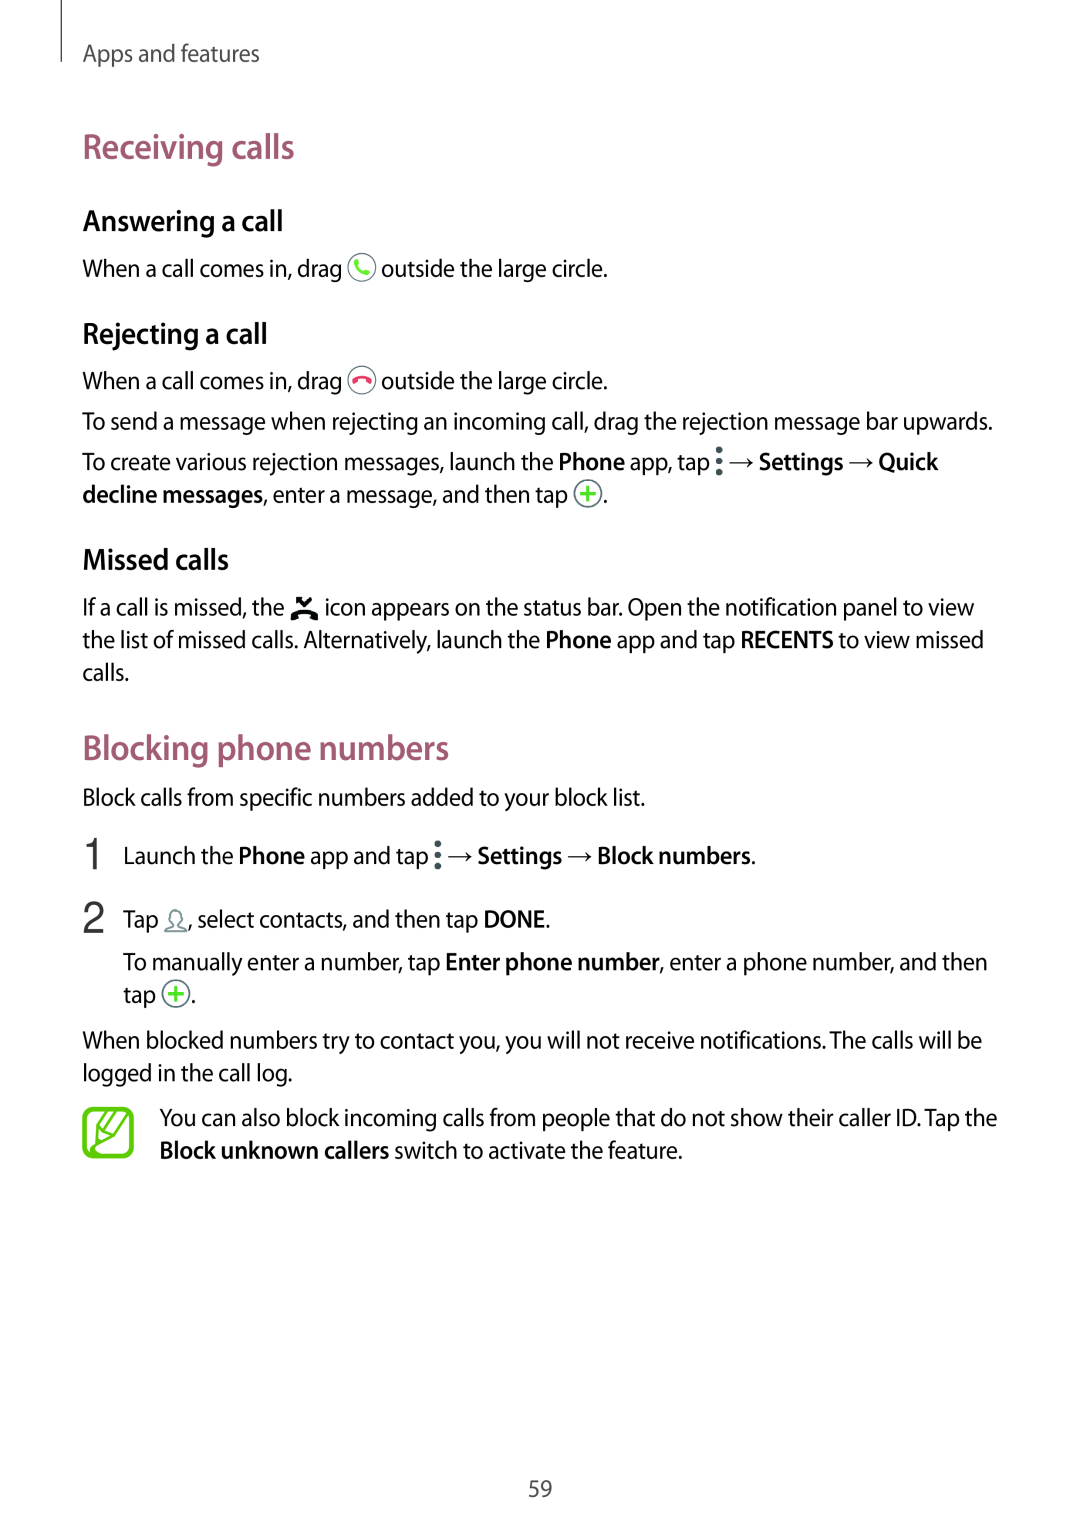 Samsung SM-A320FZBNSEE manual Receiving calls, Blocking phone numbers, Answering a call, Rejecting a call, Missed calls 